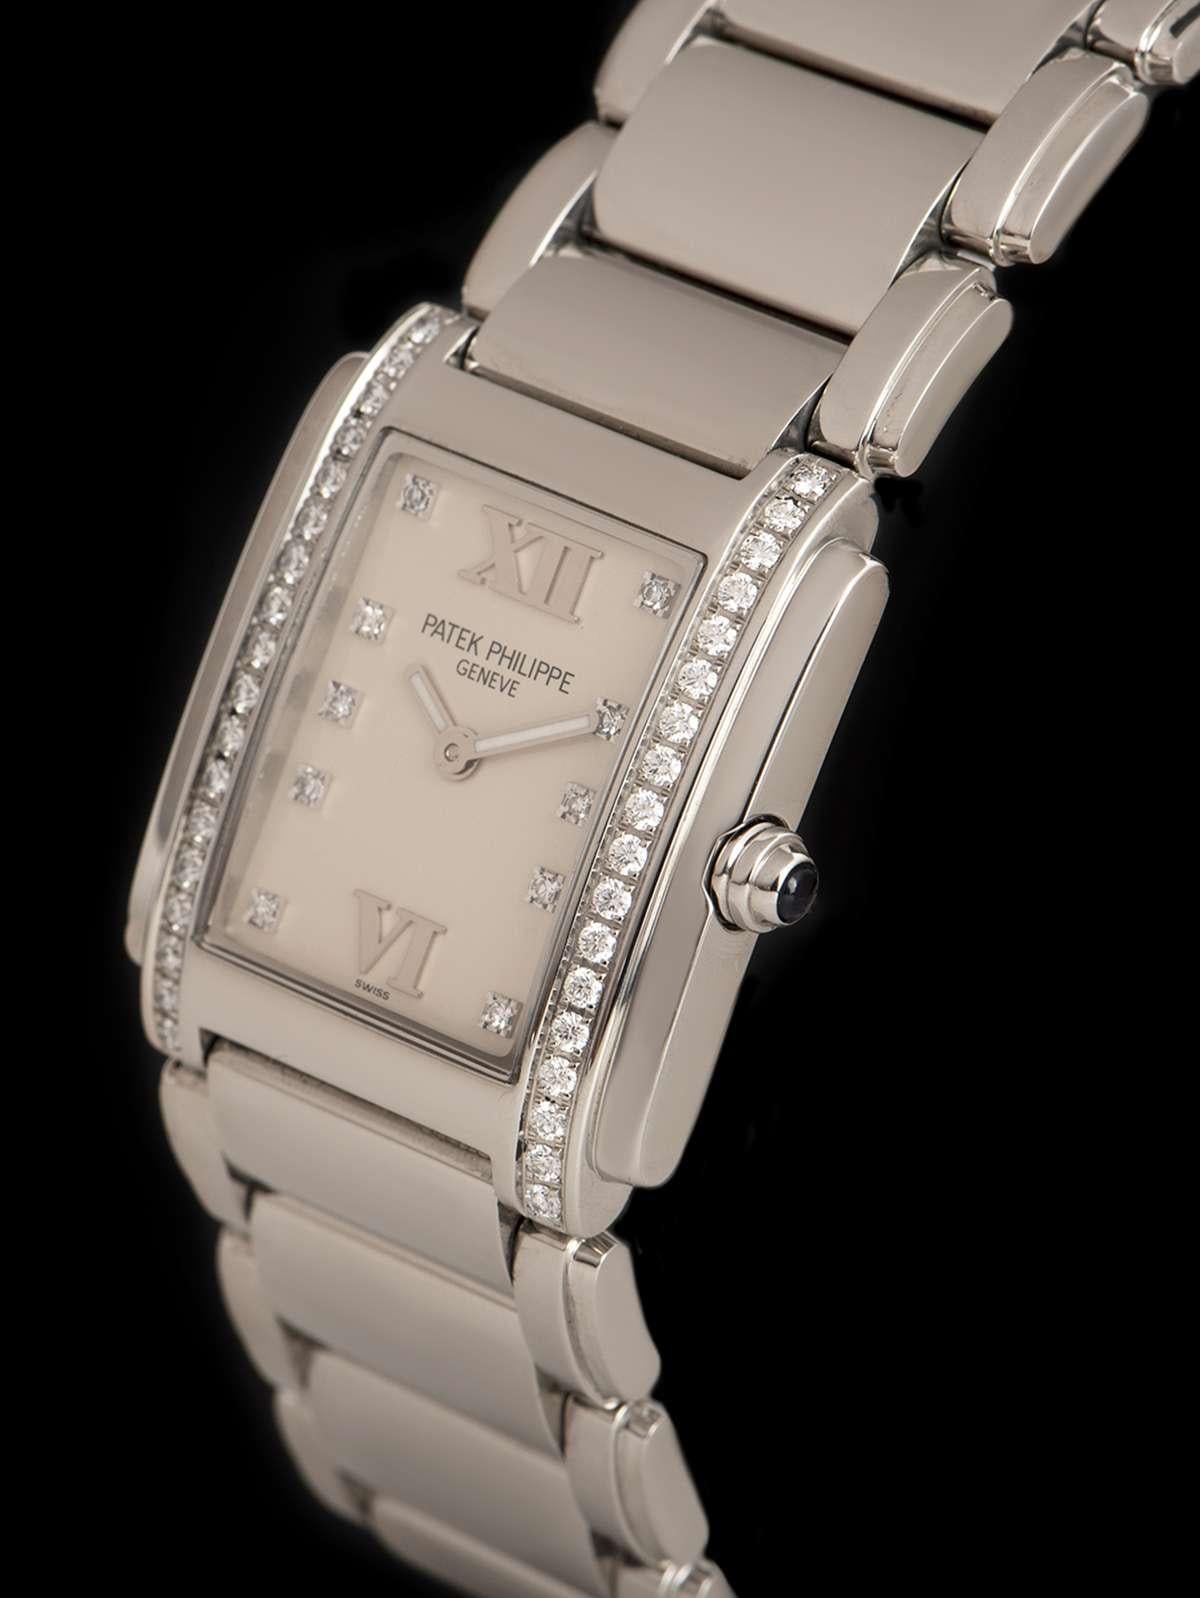 A Stainless Steal Twenty-4 Ladies Wristwatch, silver dial set with 10 applied round brilliant cut diamond hour markers and applied roman numerals 